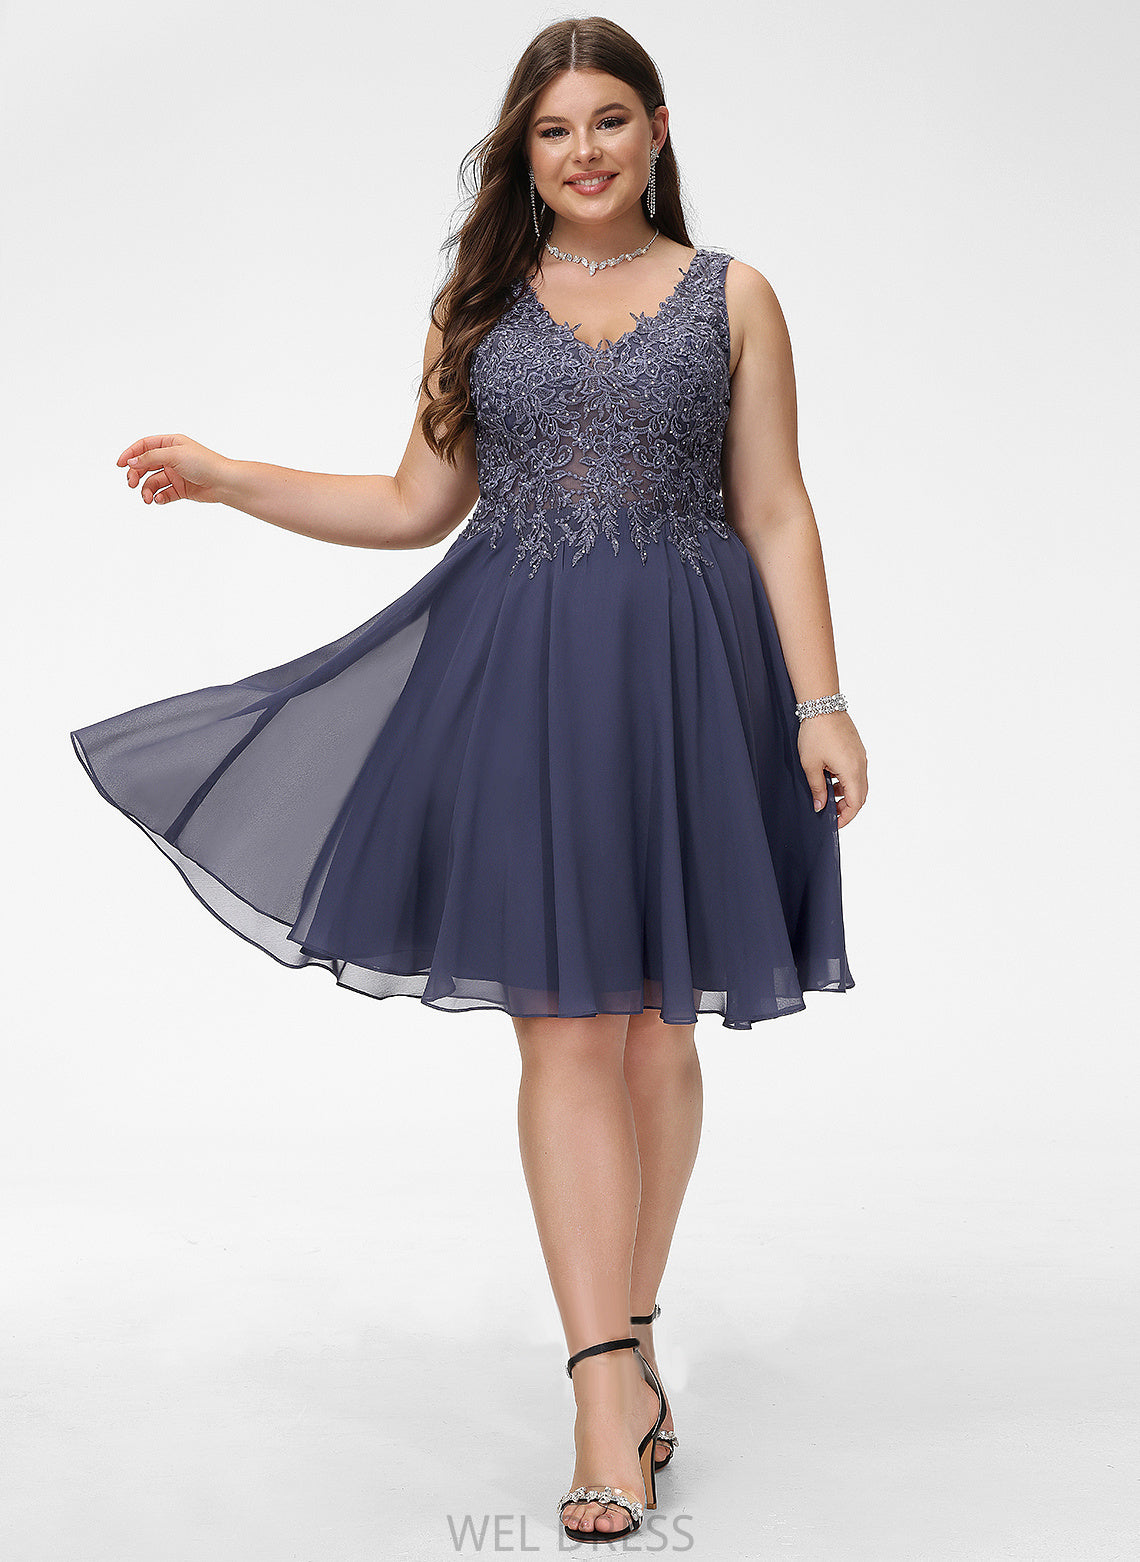 Homecoming Lace With A-Line Beading Homecoming Dresses Lizeth V-neck Dress Knee-Length Chiffon